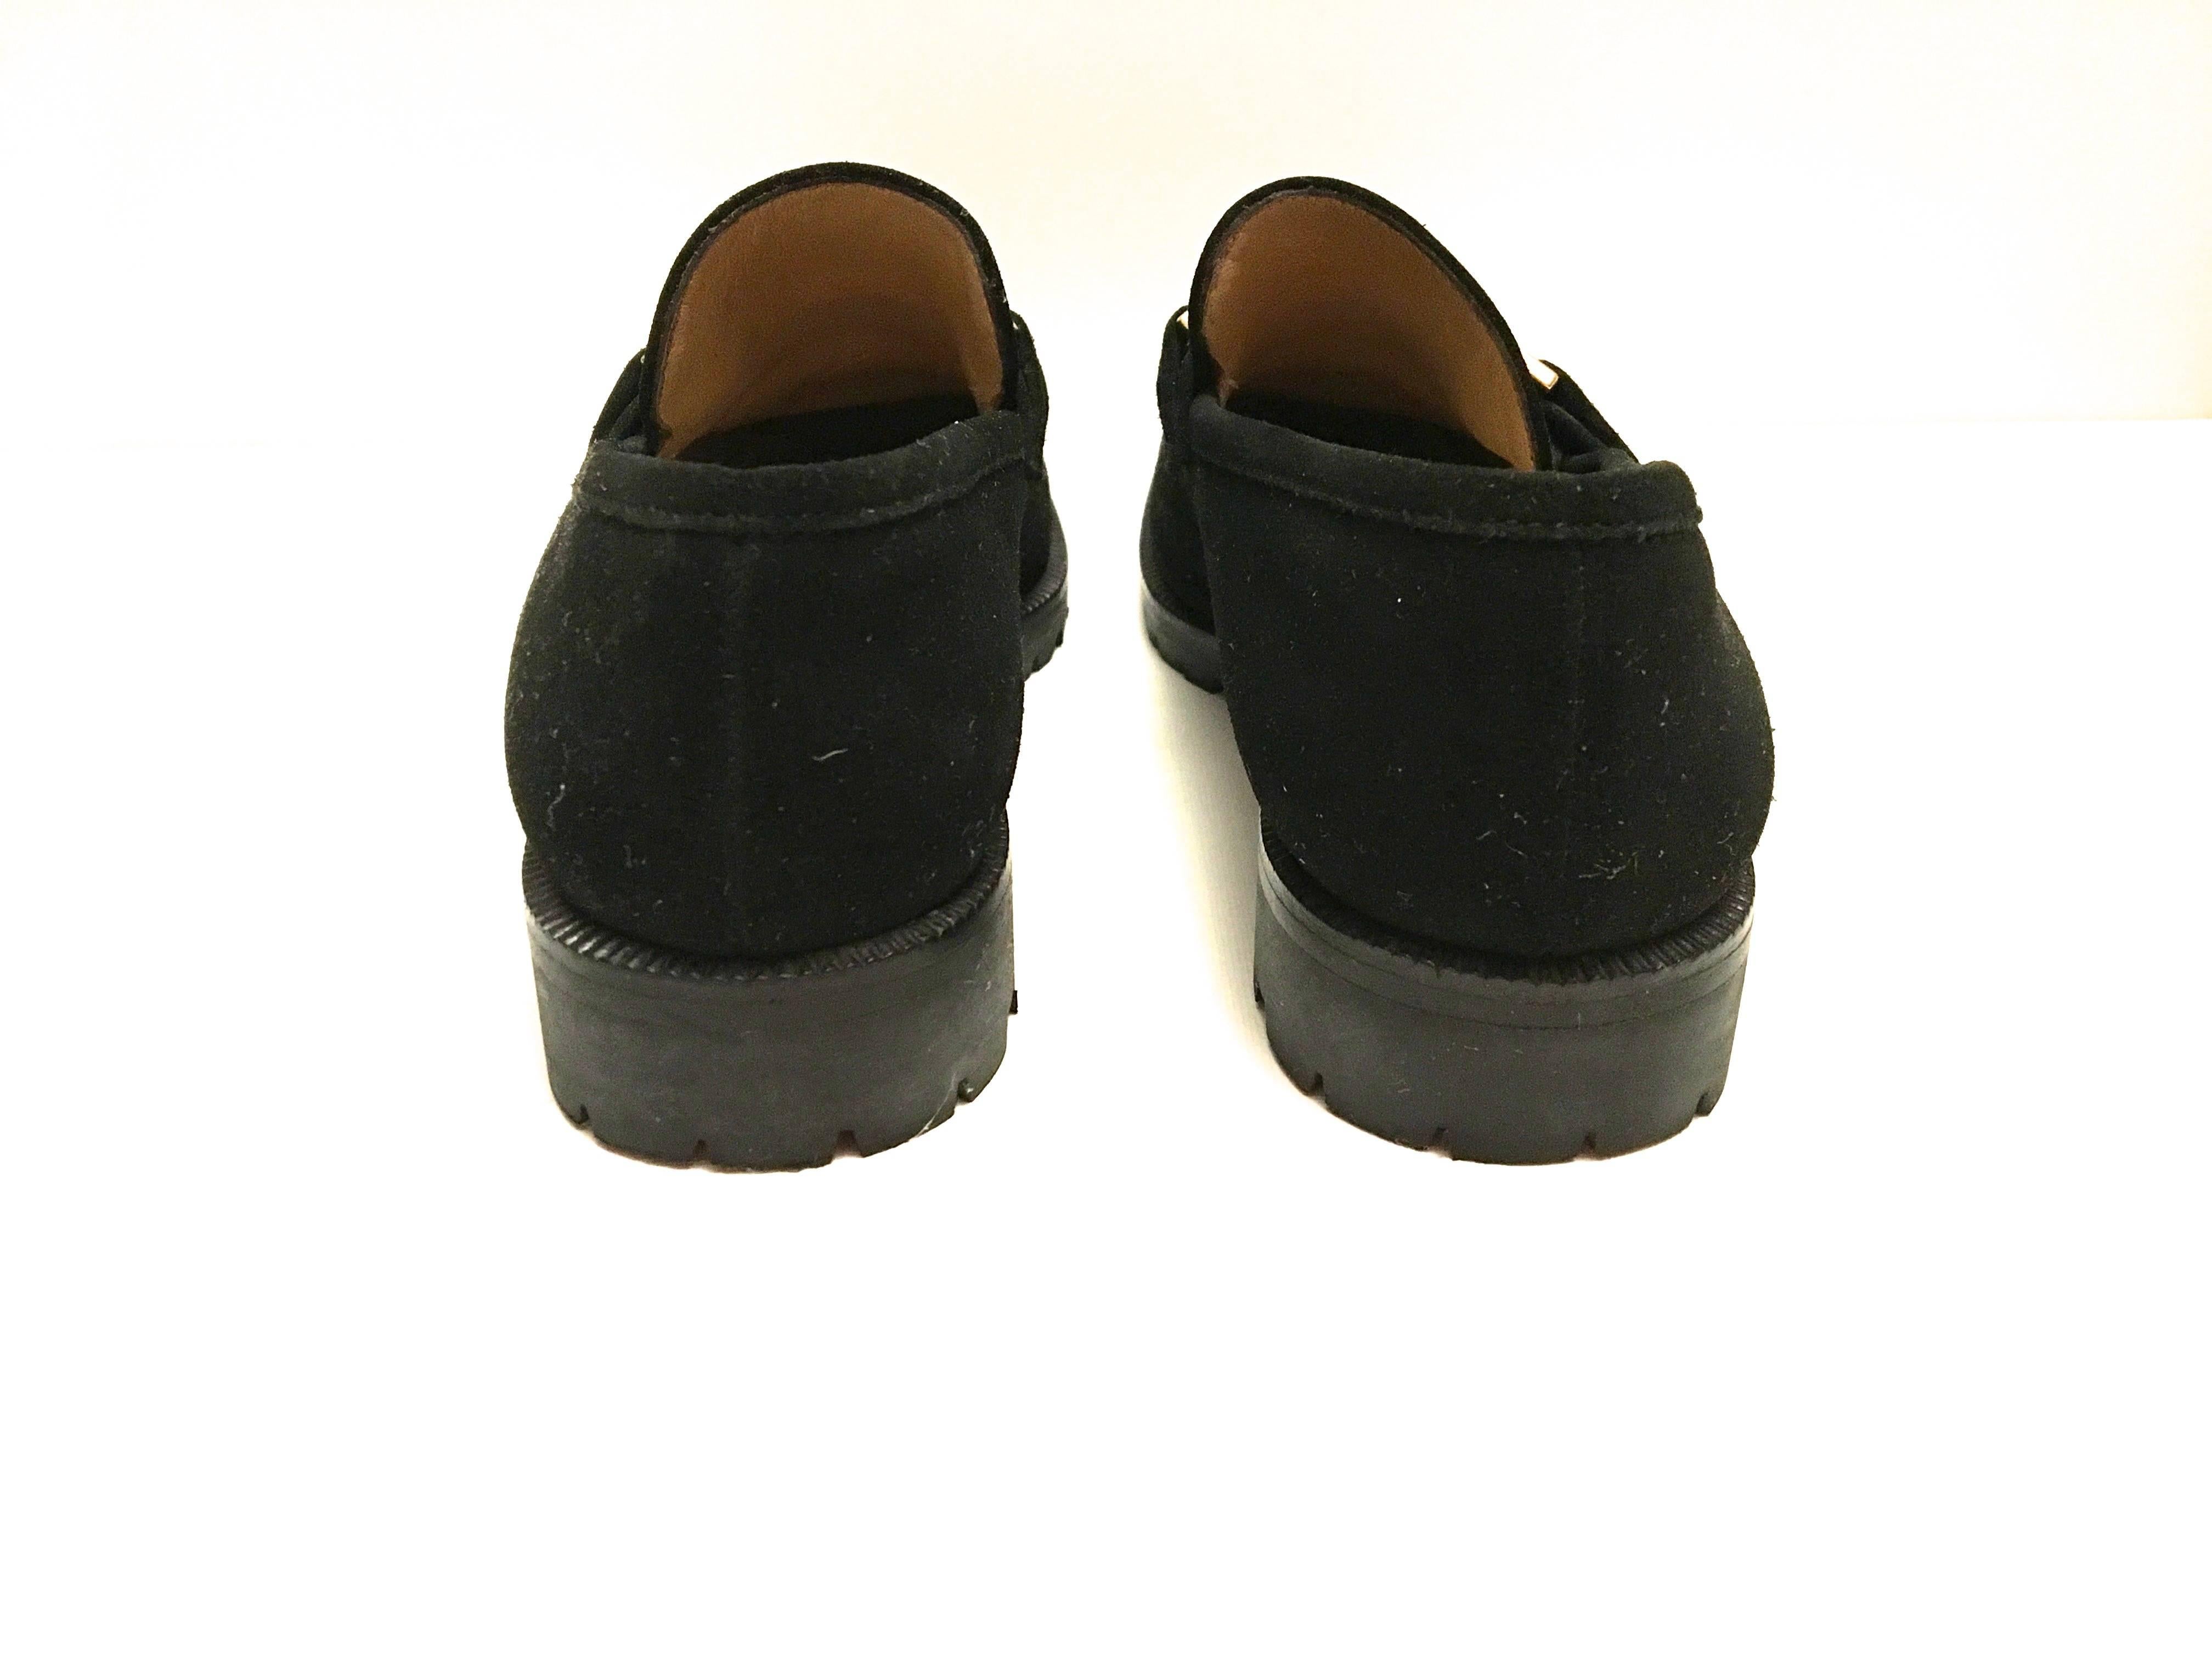 Presented here is a pair of like-new pair of loafers from Gucci. This pair of fabulous loafers is a size 36 and is comprised of a soft black suede on the exterior. The inside of a size smooth tan leather. There is a bamboo horse bit over the top of